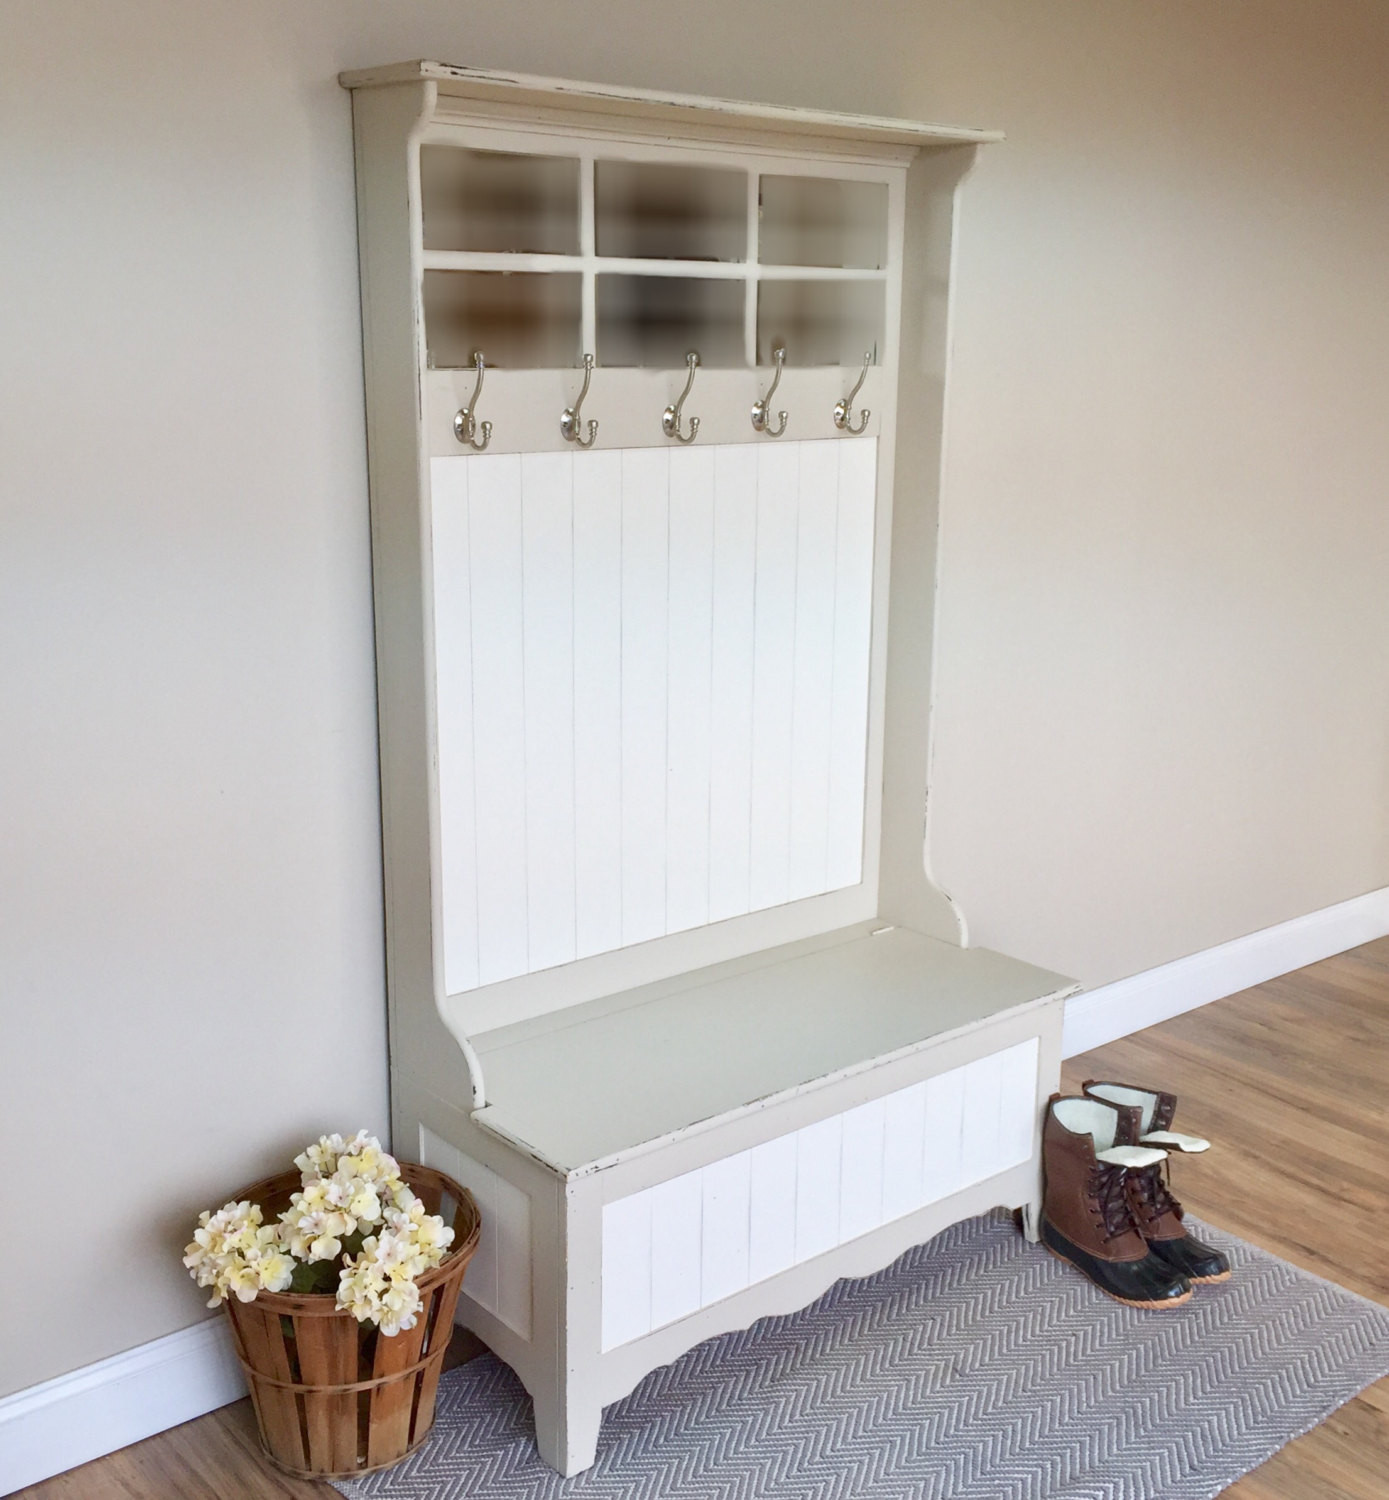 Hall Bench With Storage
 Hall Tree Storage Bench Foyer Furniture White by